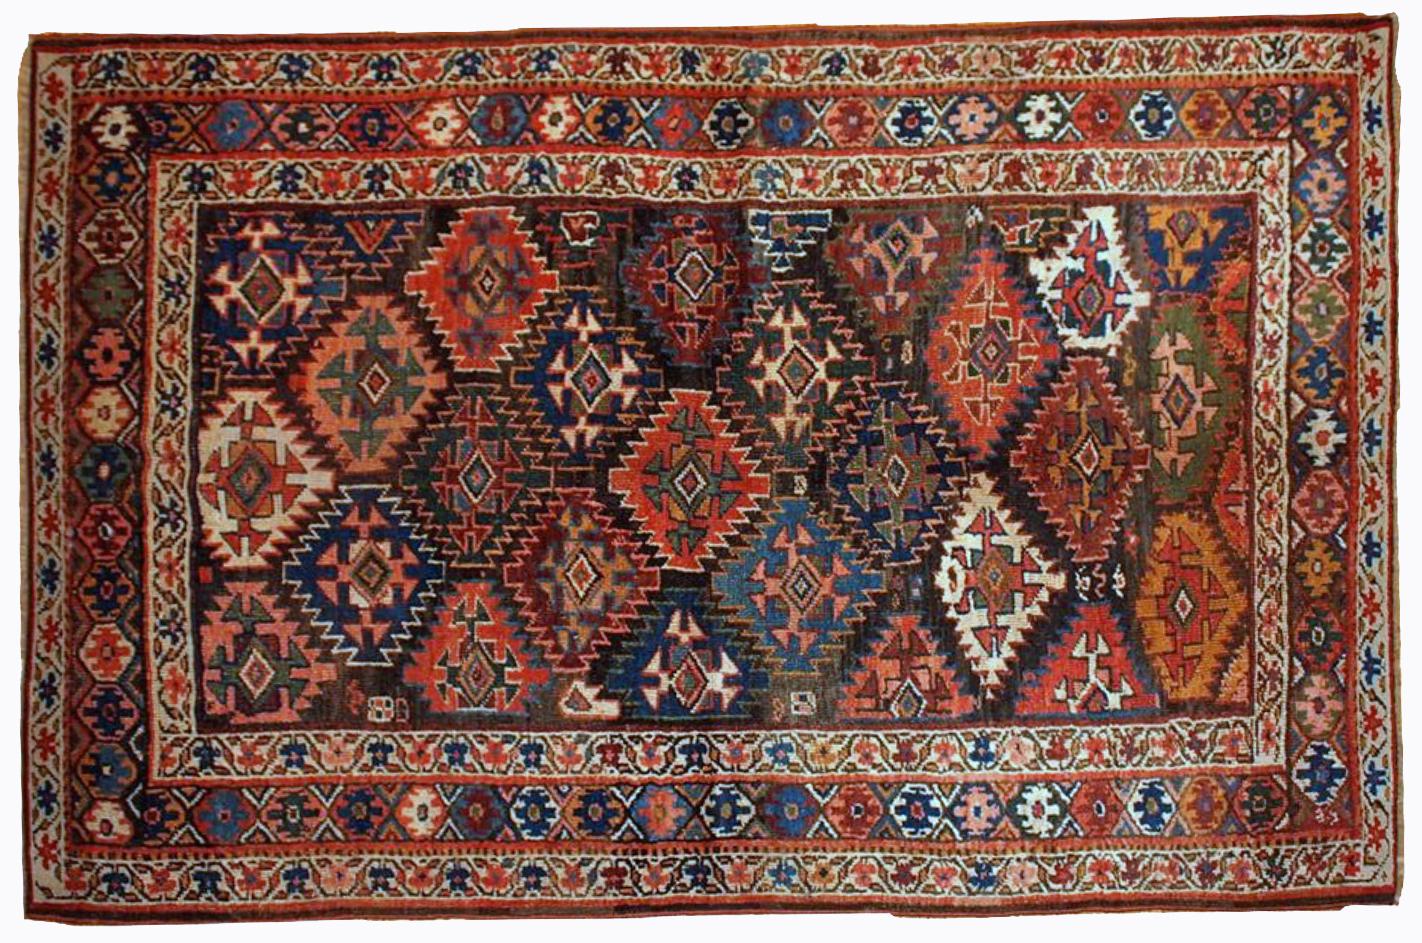 Antique Kurdish style rug in chocolate brown background color and repeating pattern. This rug has Jaff Kurdish design. It is in original good condition. Measures: 4.2' x 6.3' (128cm x 193cm).
 